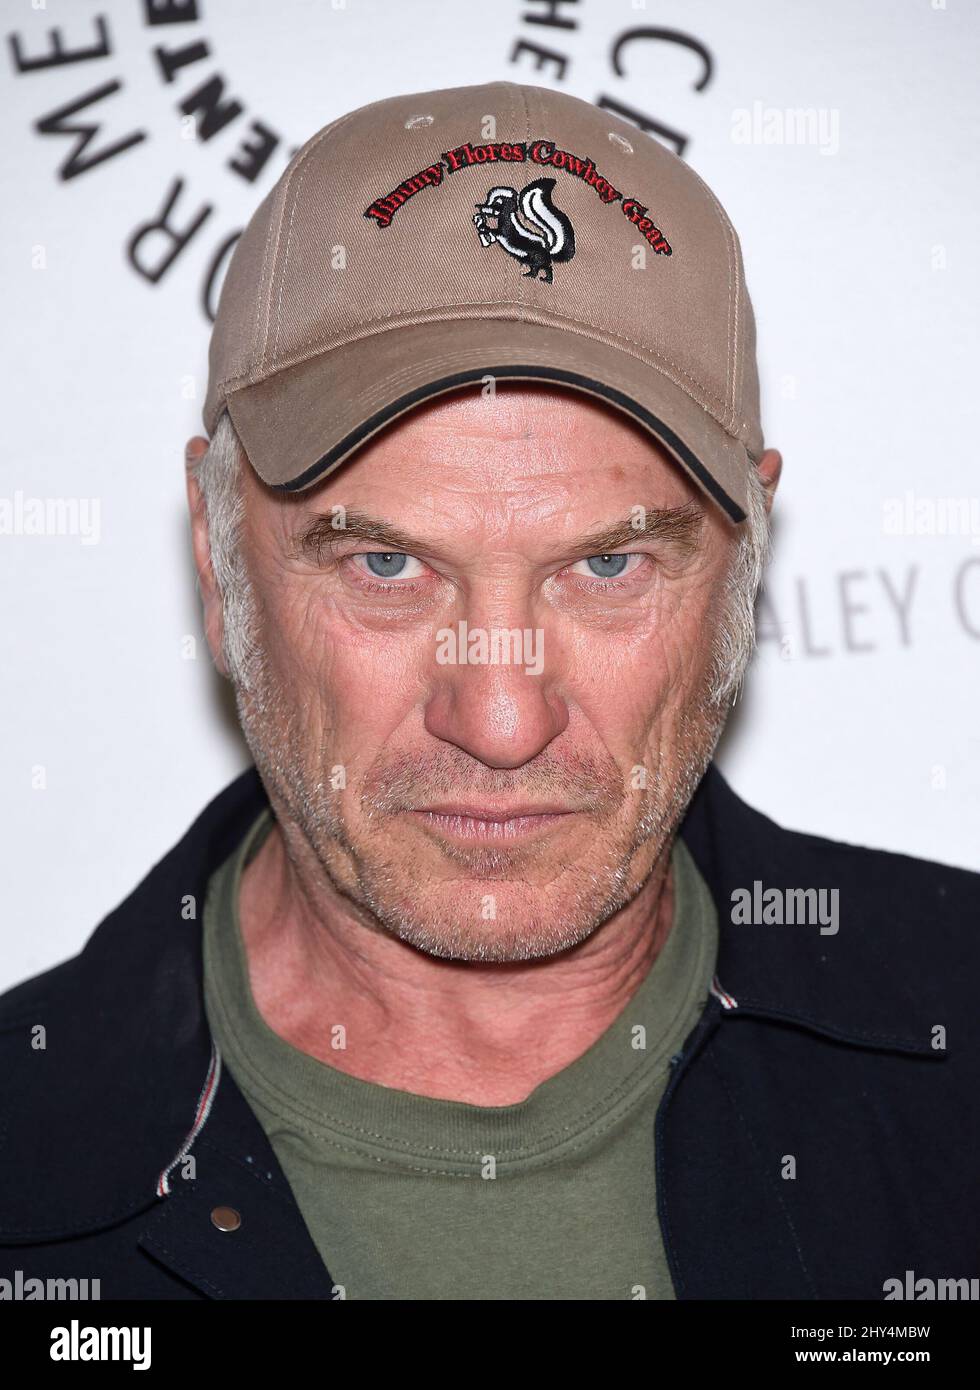 Ted Levine attending 'The Bridge' Season 2 premiere screening held at The Paley Center for Media in Beverly Hills, California. Stock Photo